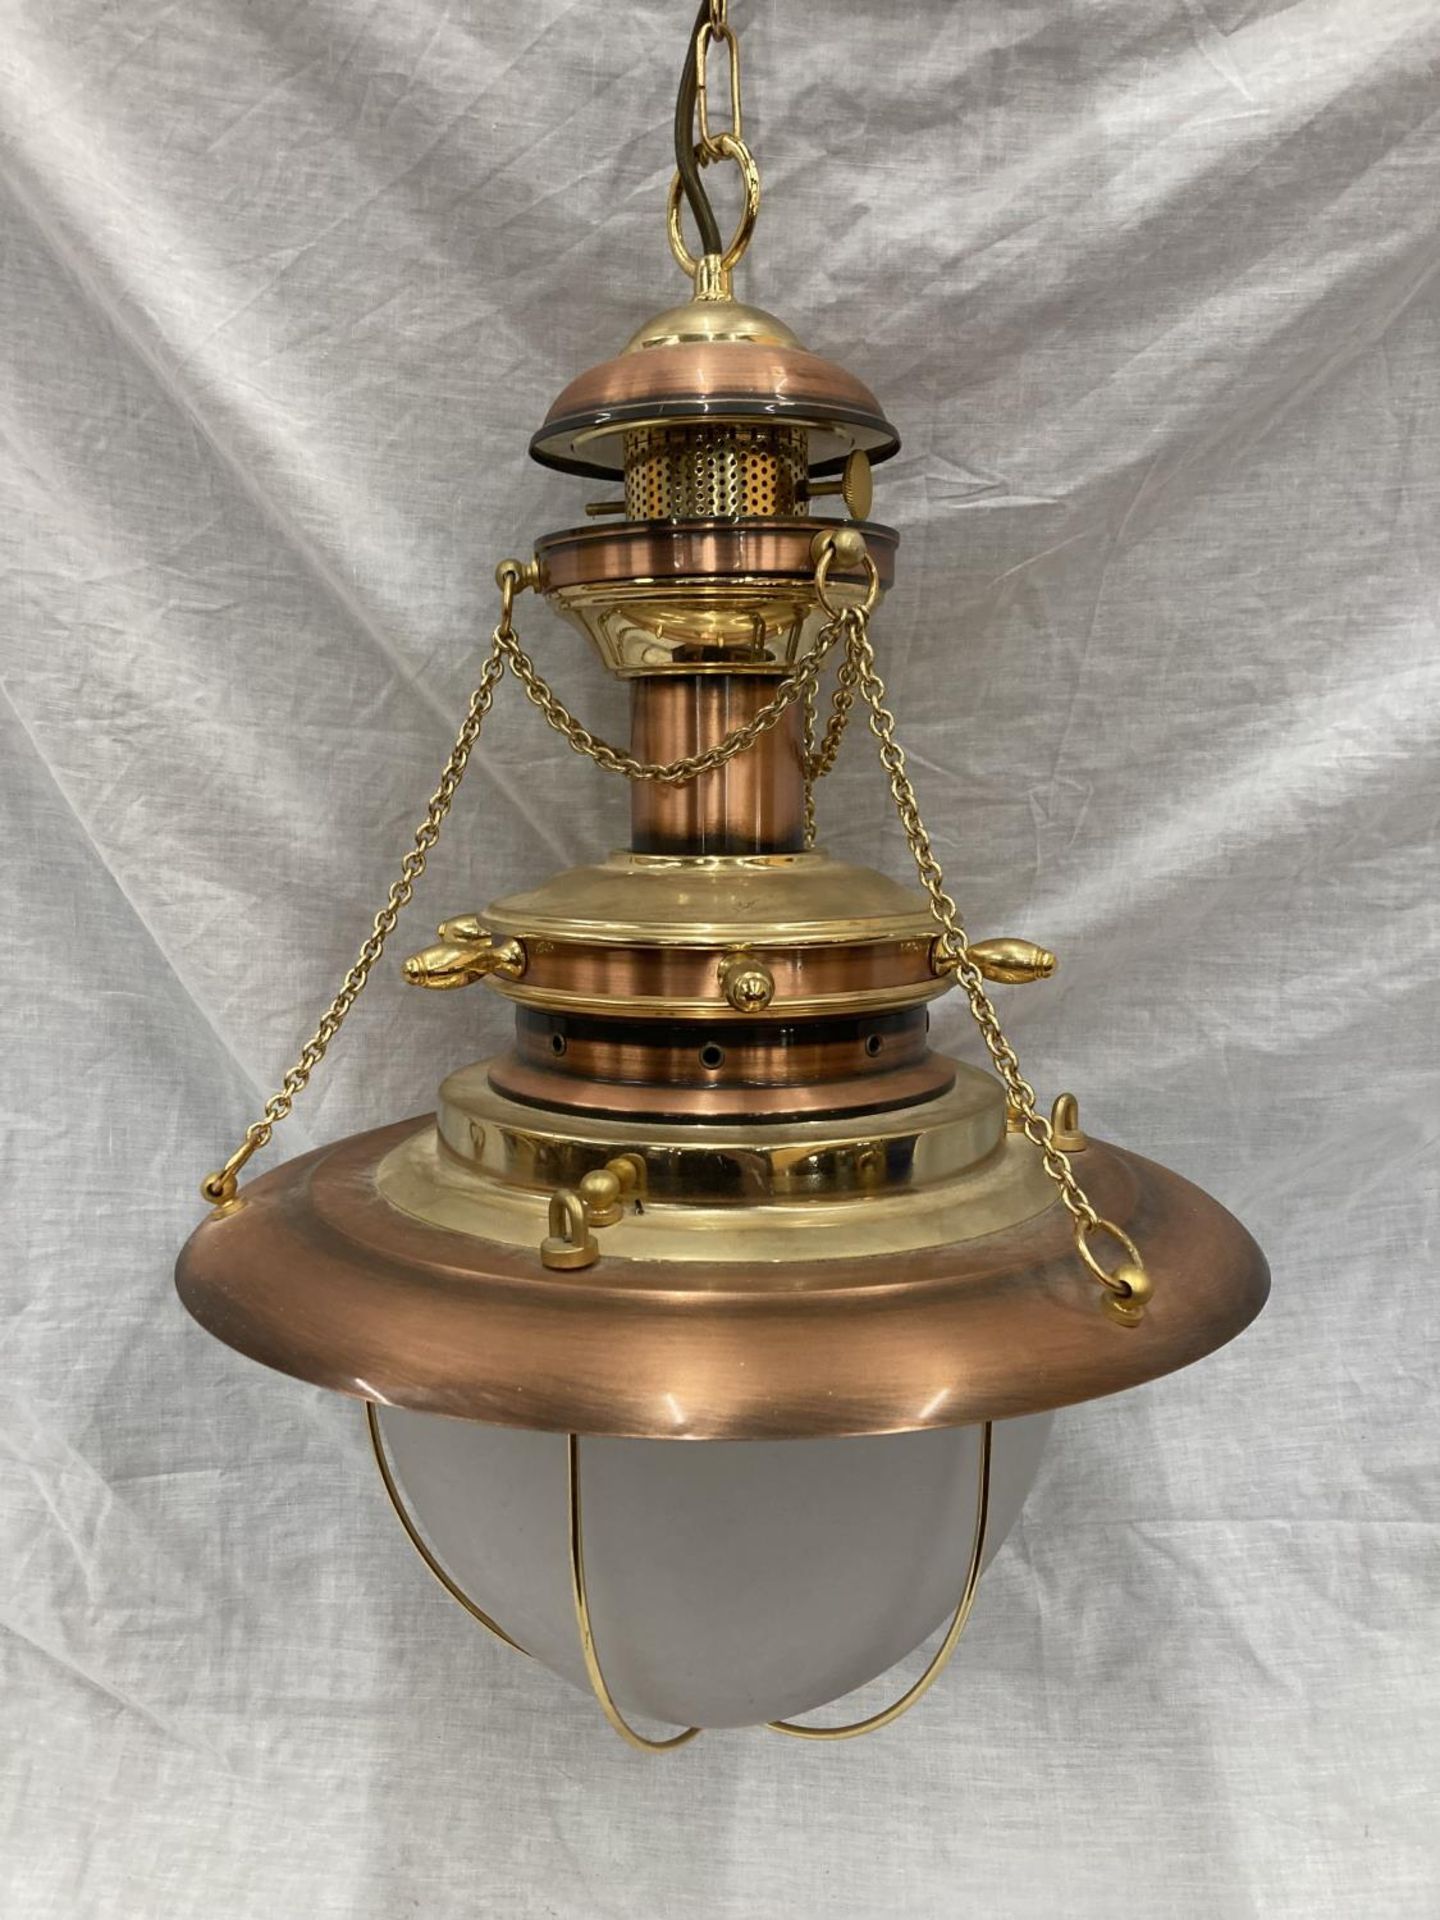 AN UNUSUAL BRASS AND COPPER PENDANT LIGHT WITH DOMED GLASS SHADE, SHIPS WHEEL DESIGN AND CHAINS - Image 5 of 5